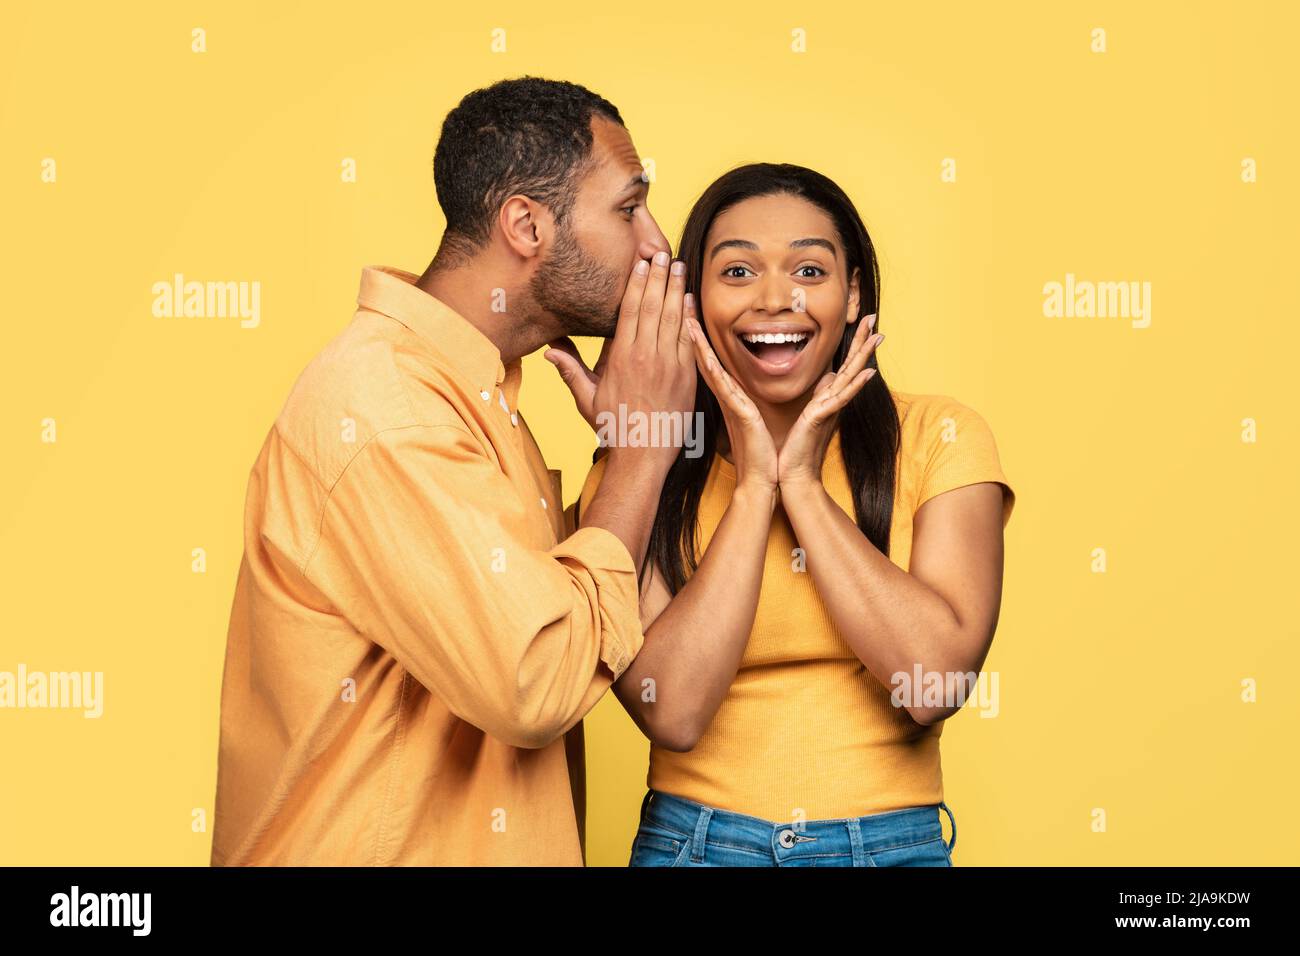 Young black guy sharing secret or whispering gossip into his girlfriend's ear on yellow studio background Stock Photo